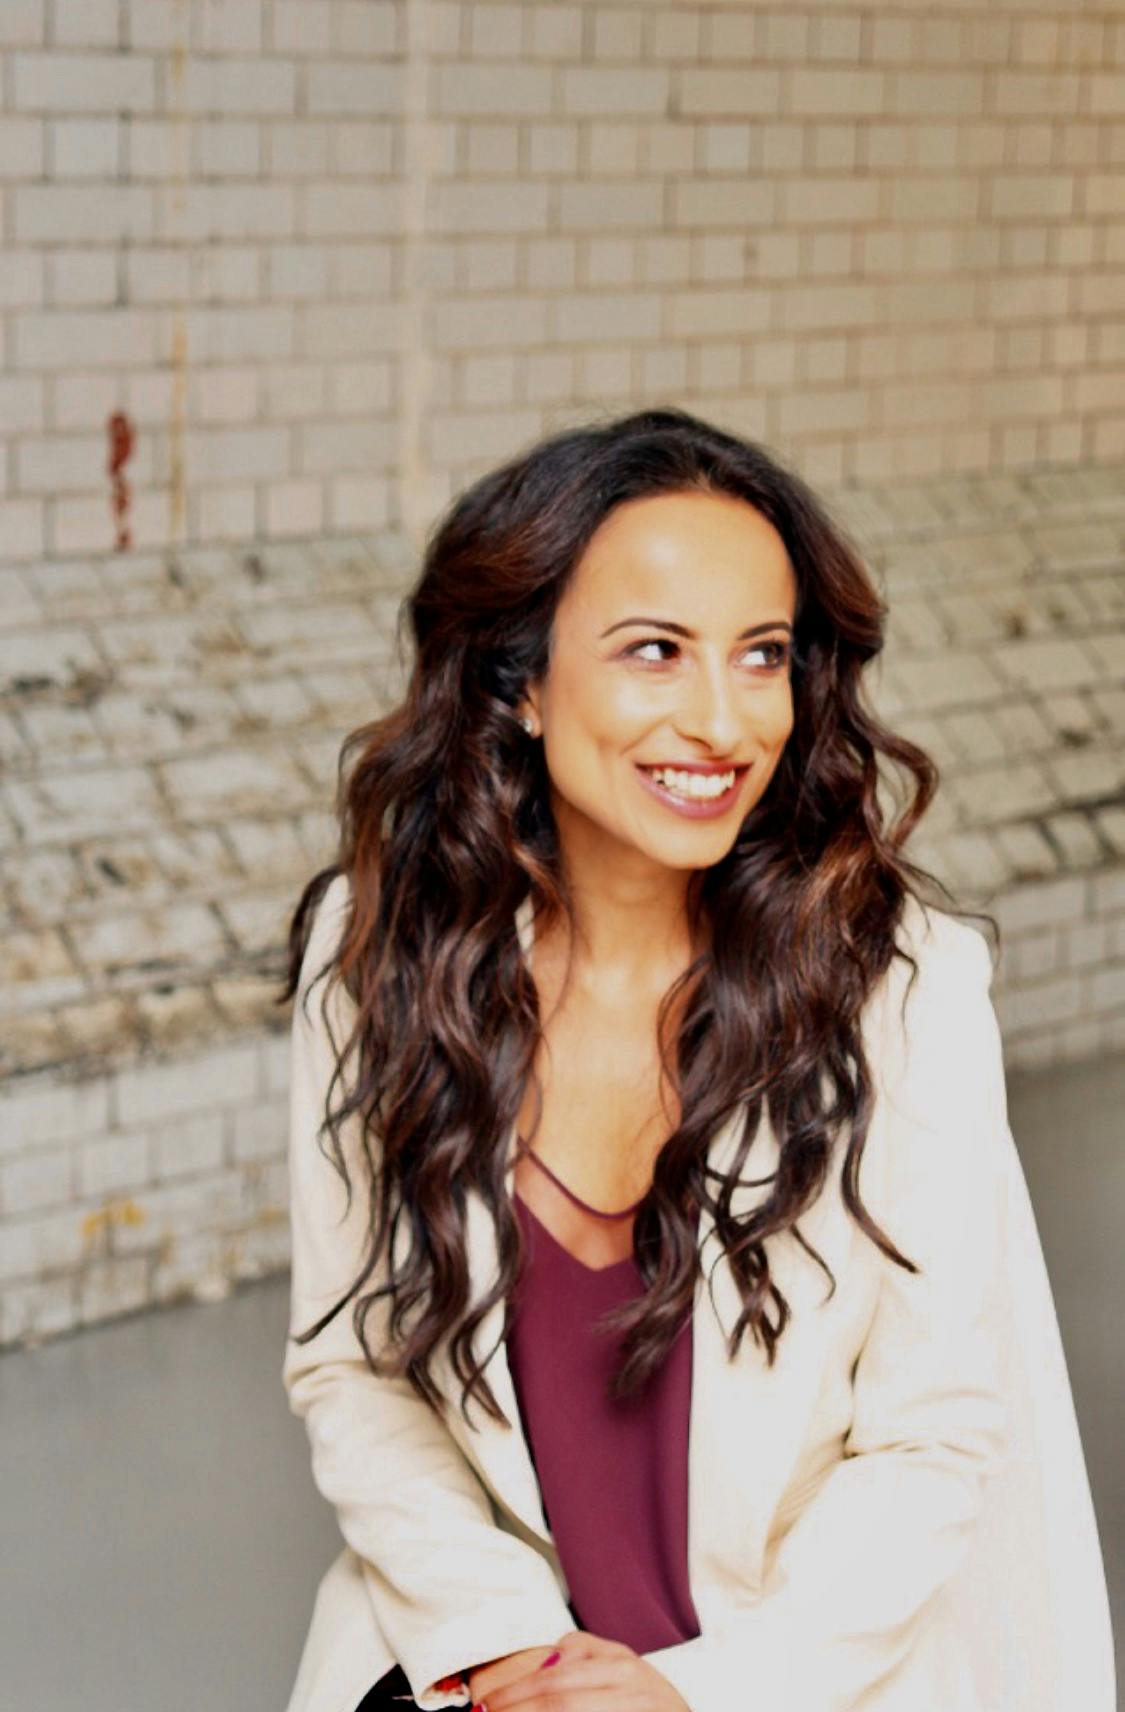 Woman, light-skinned with wavy hair. Wearing a white blazer with a burgundy undervest. Smiling.